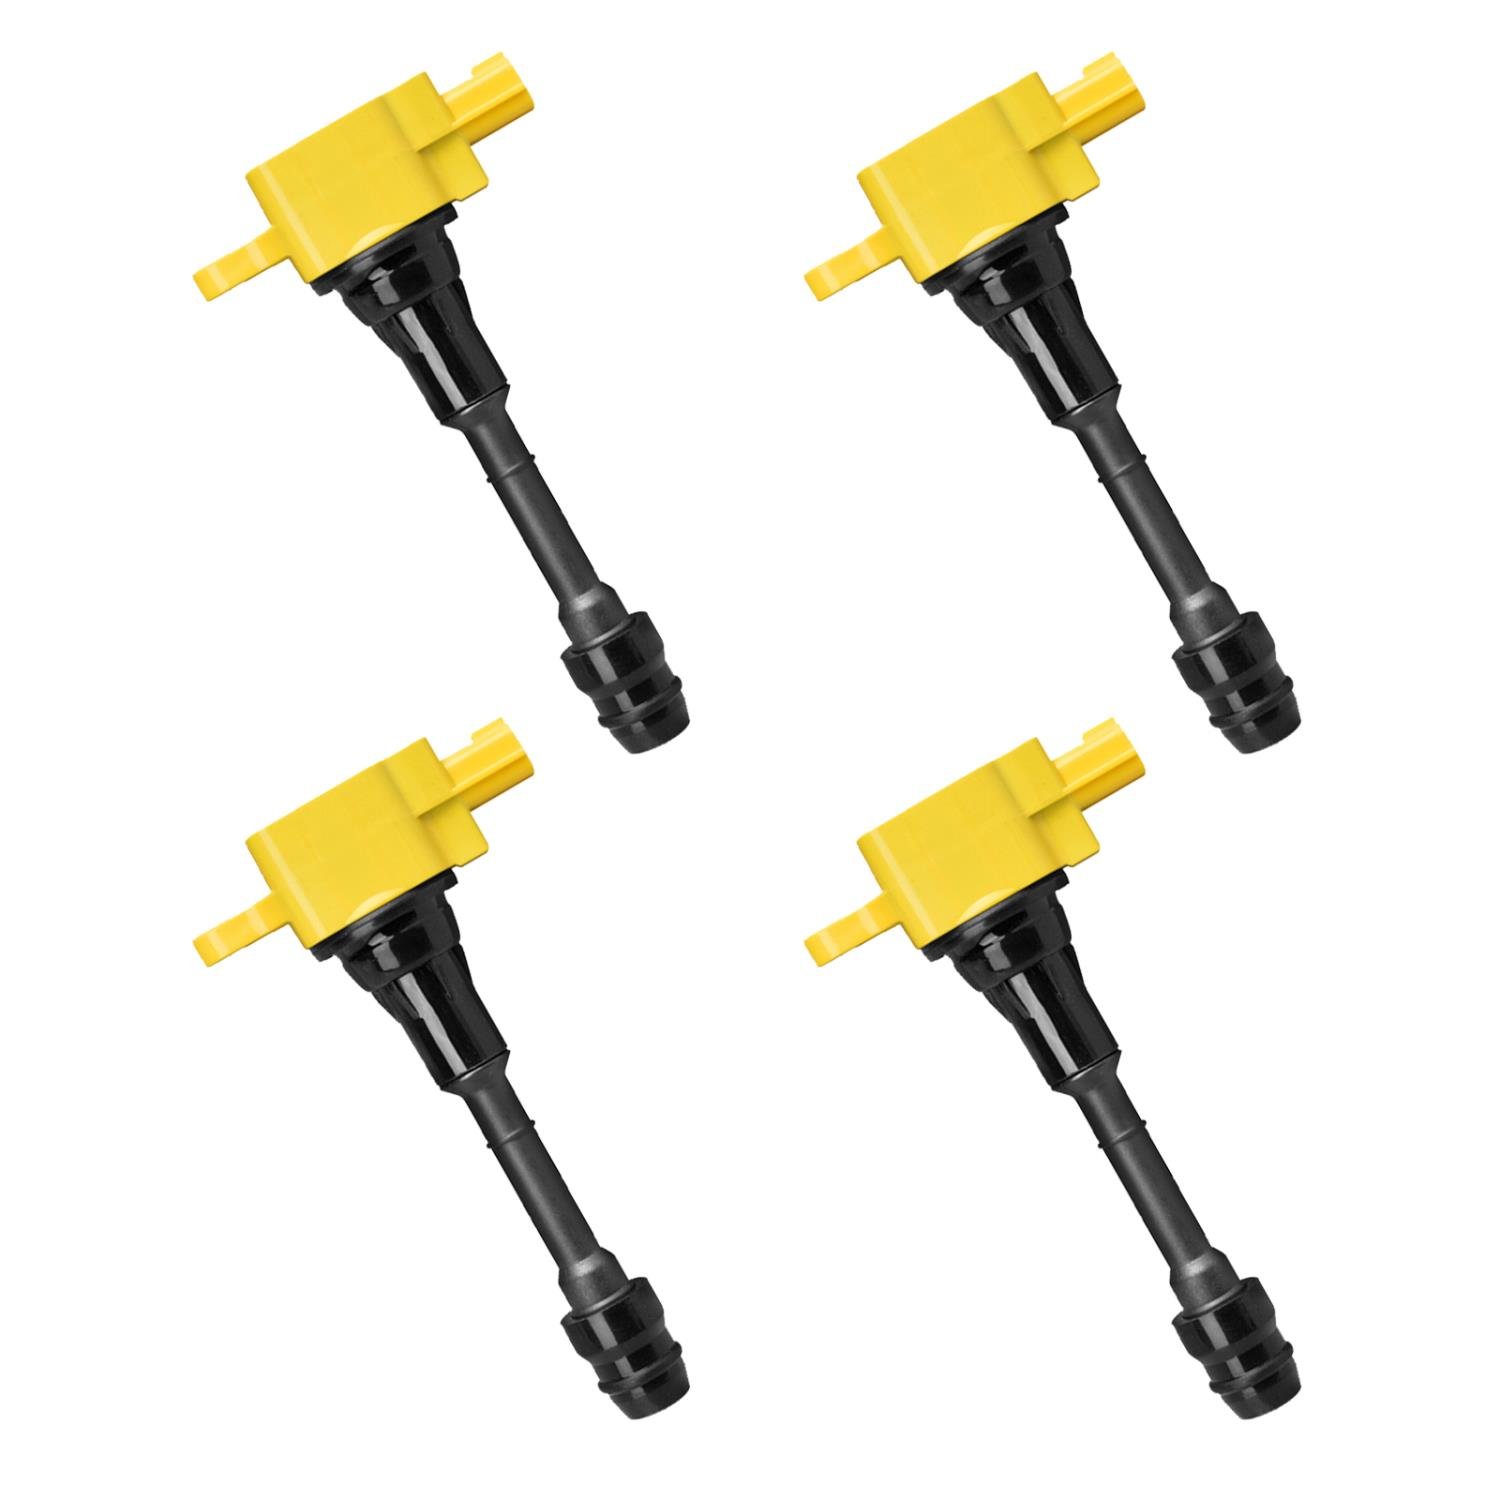 High-Performance Ignition Coils for Nissan Altima Sentra L4 [Yellow]